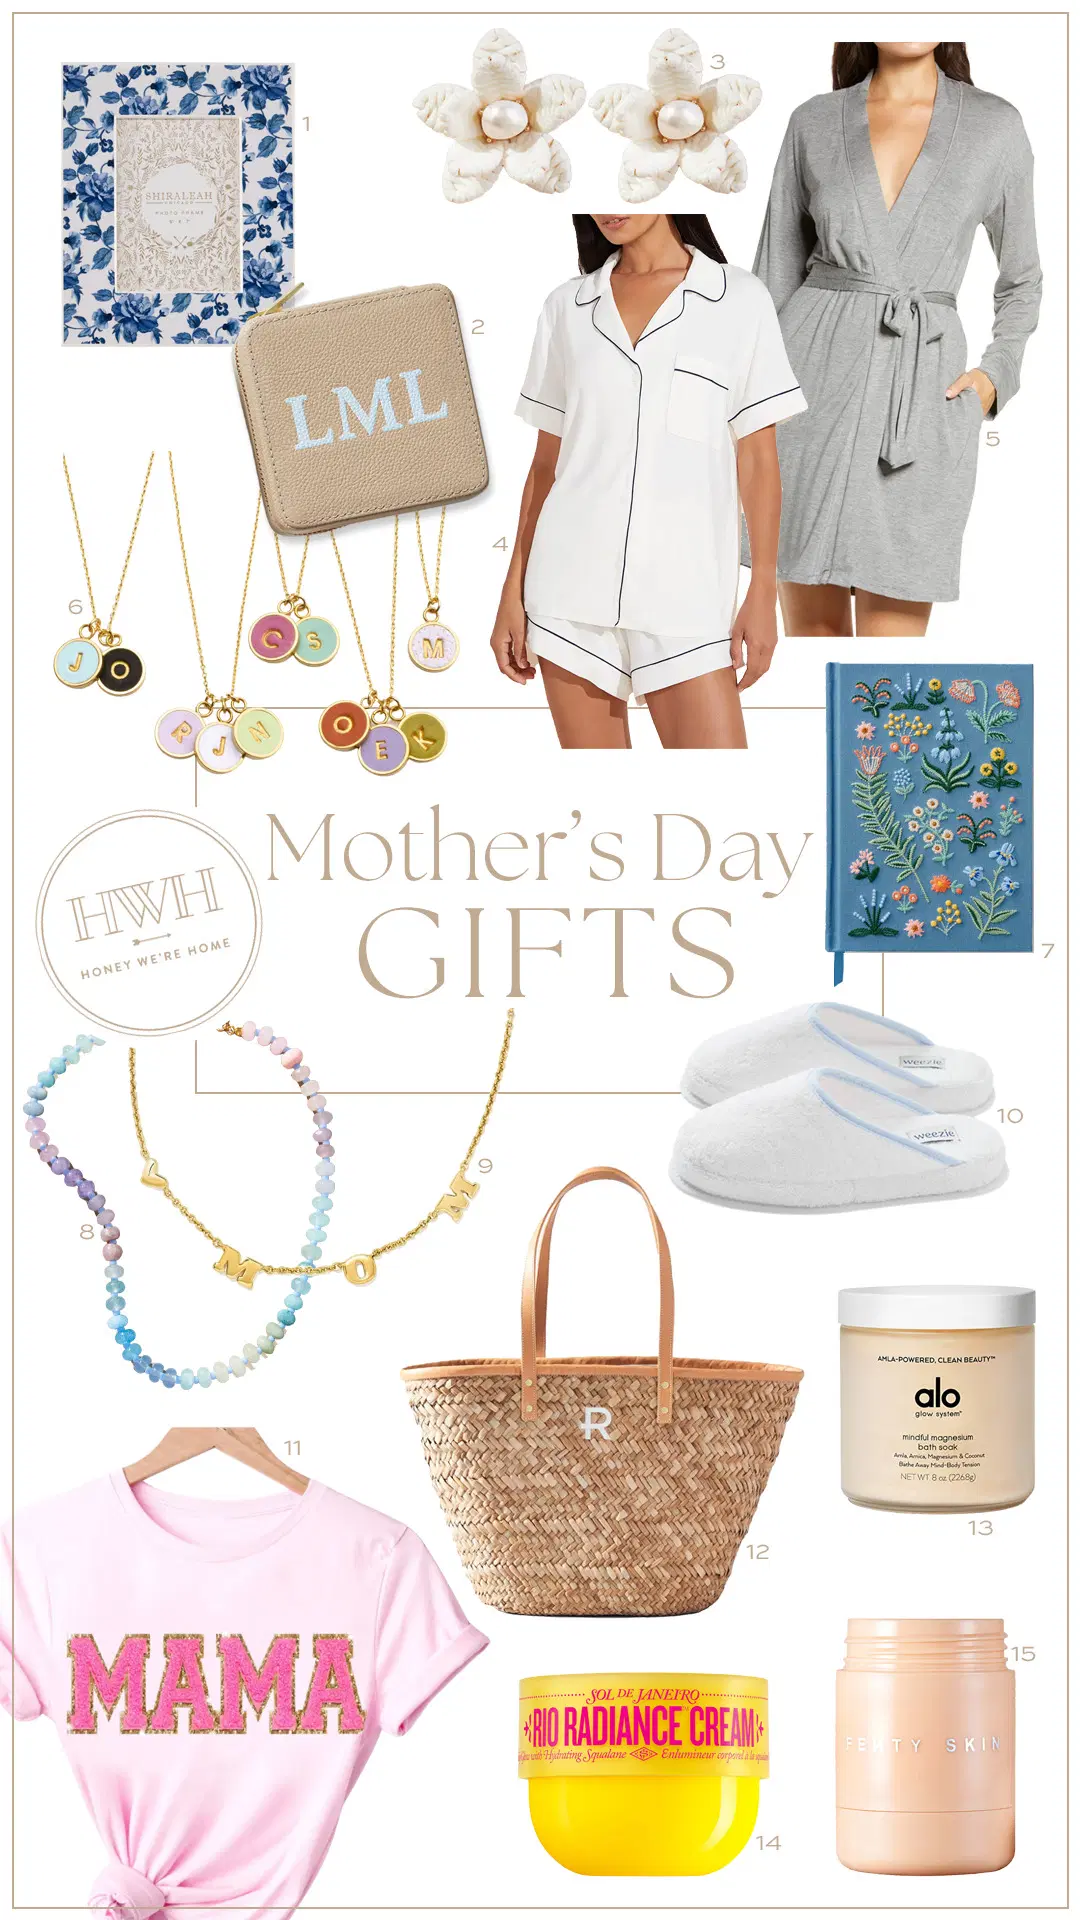 Mother’s Day Gifts Ideas from Amazon & Beyond